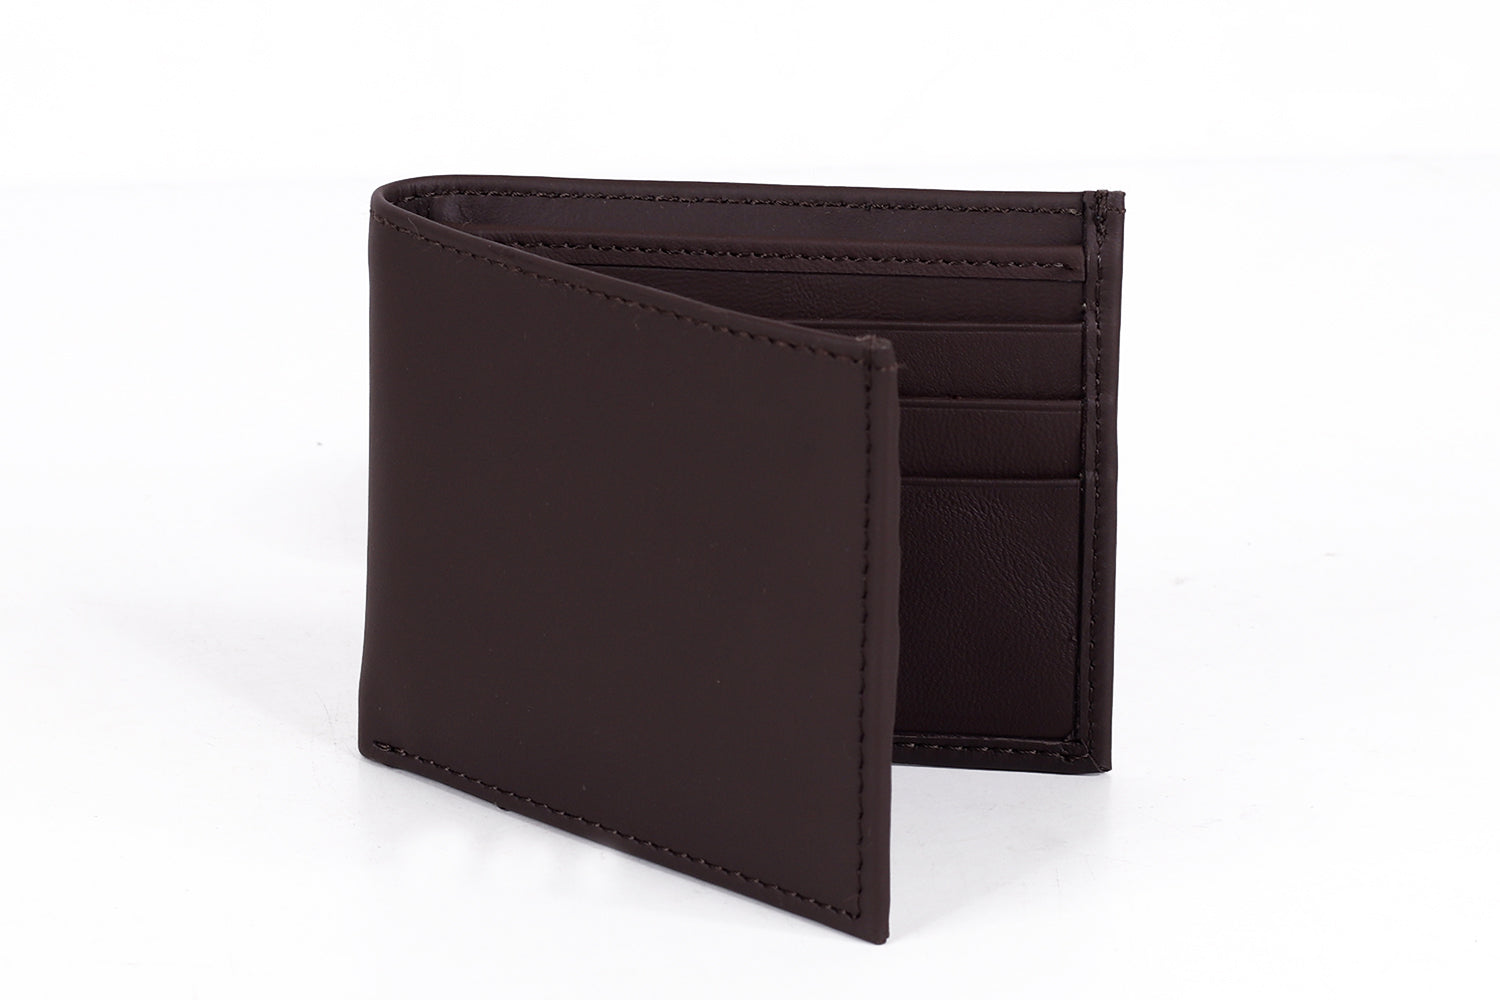 Ostrich Leather Diamond Wallet for Sale Online